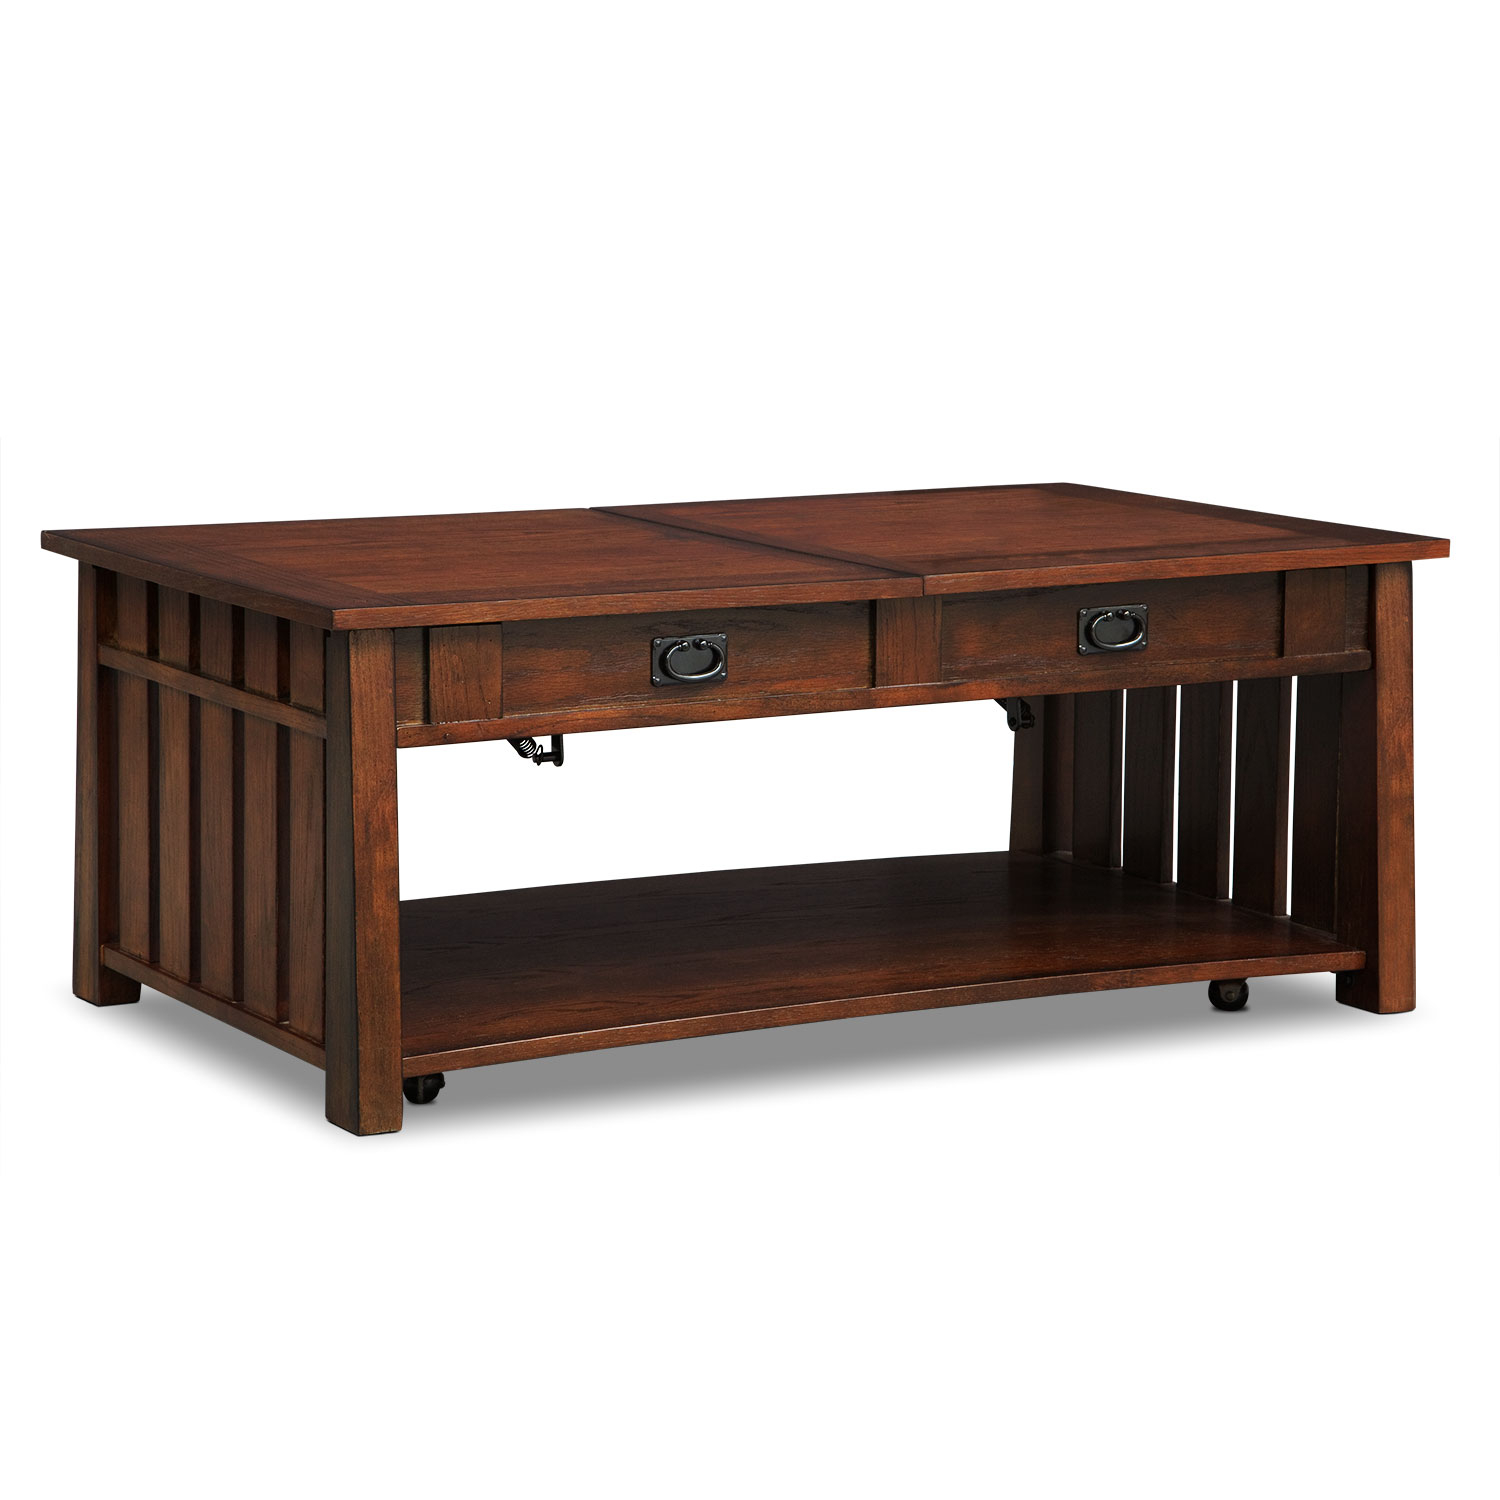 Tribute Lift Top Coffee Table Value City Furniture And Mattresses pertaining to measurements 1500 X 1500